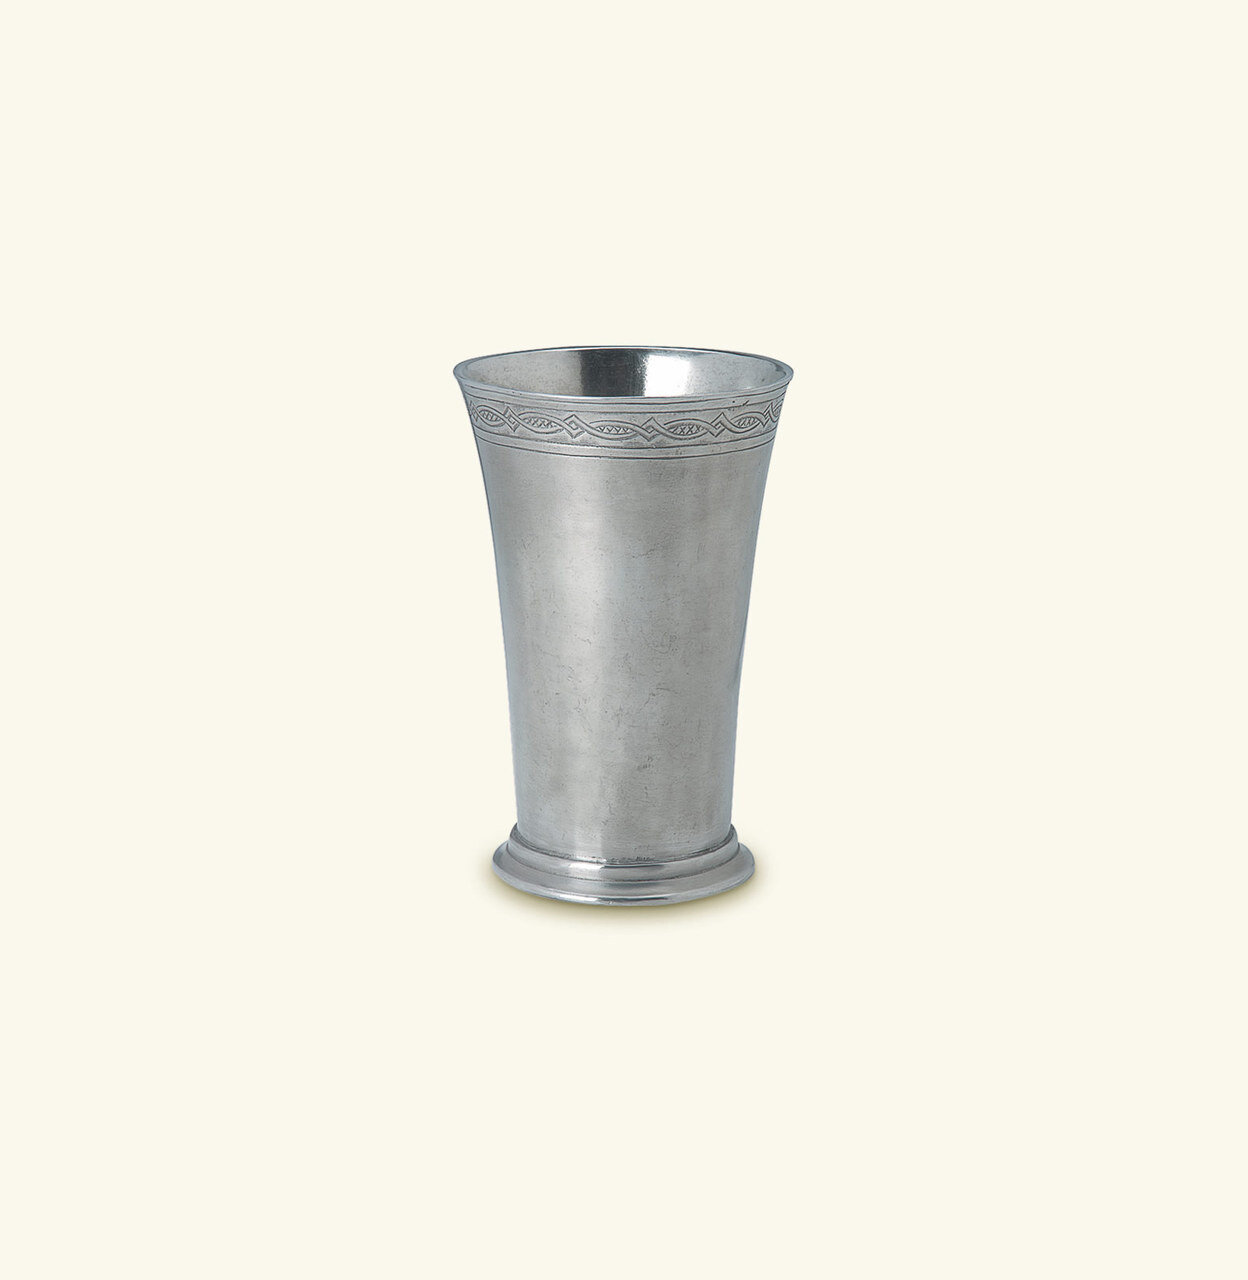 Match Pewter Tall Cup a532.0